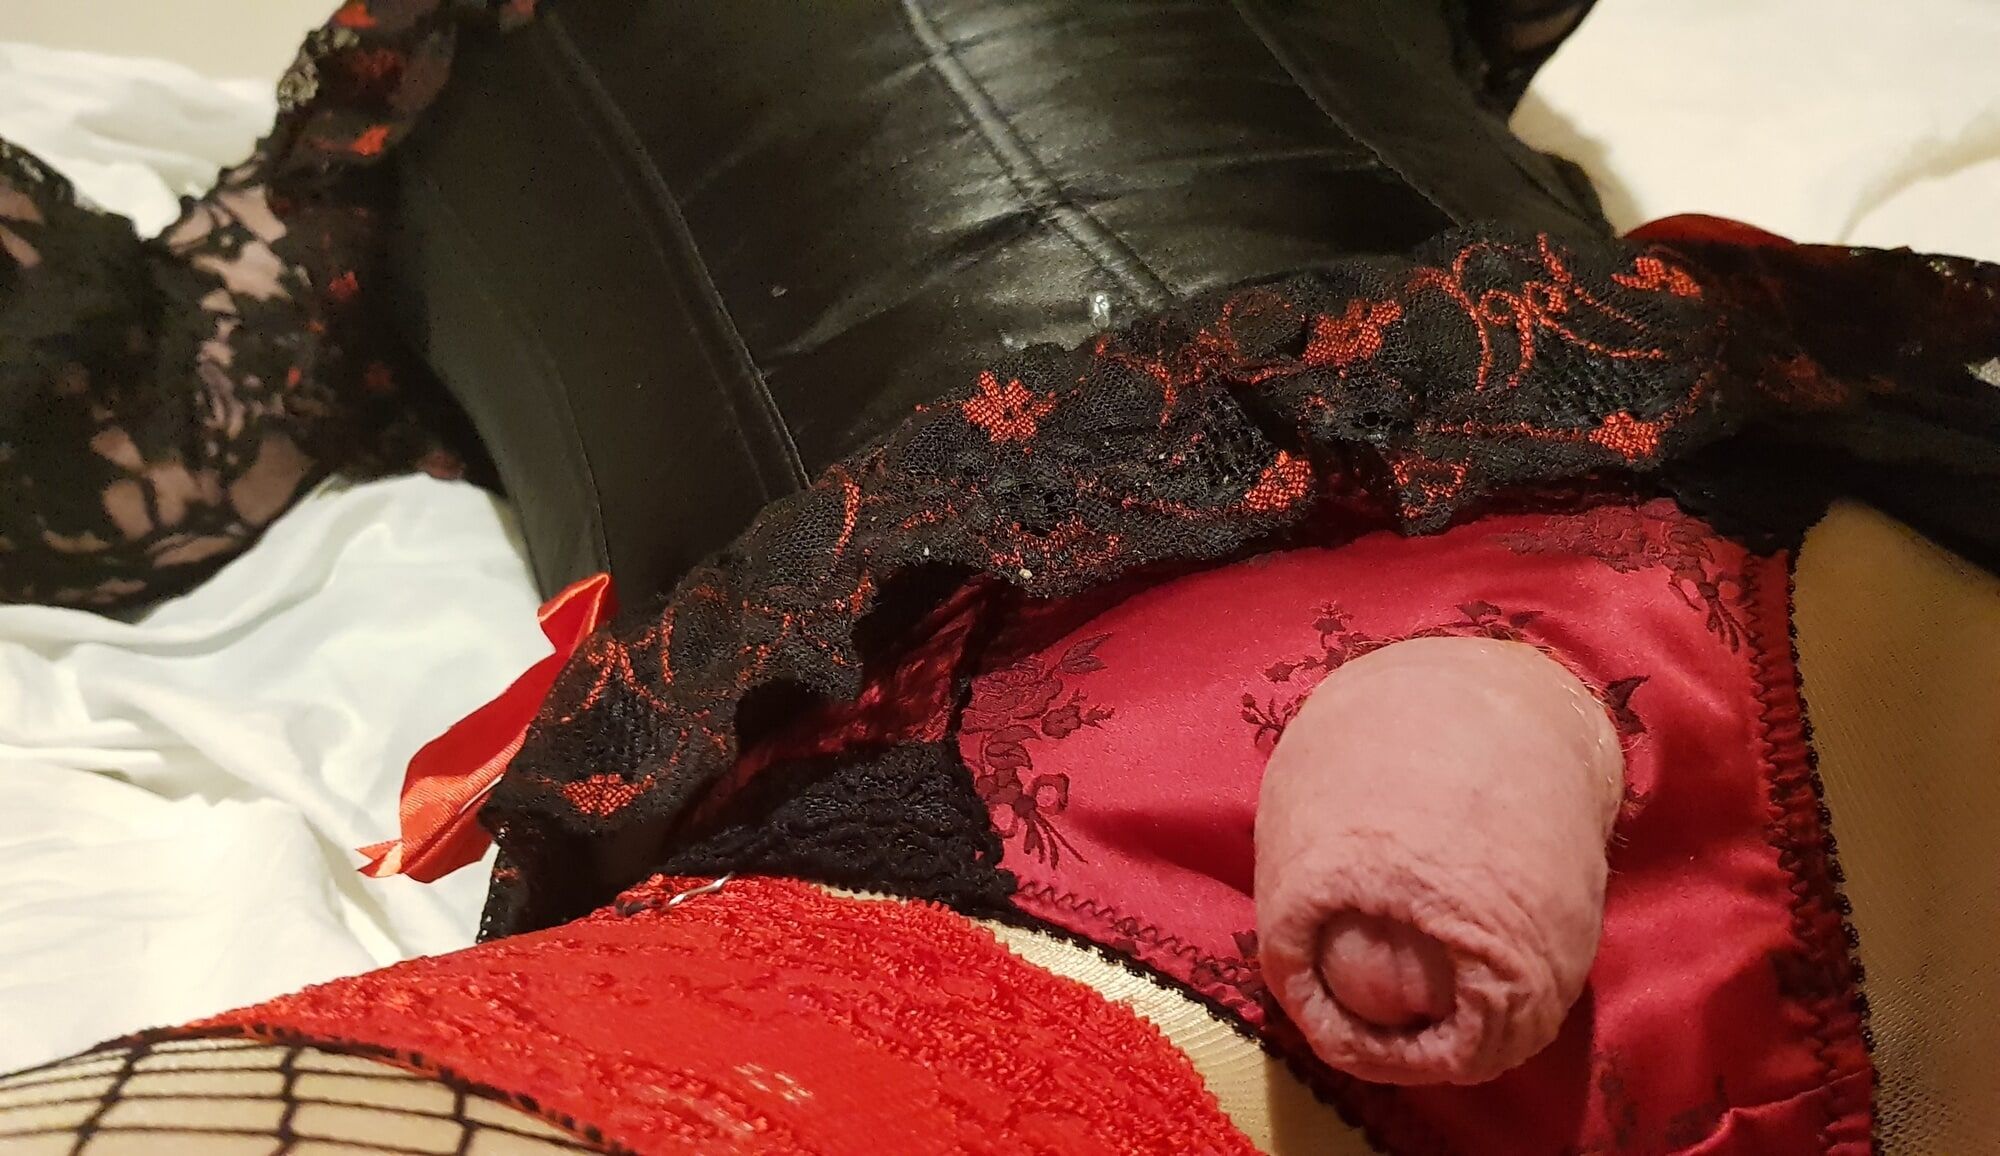 Crossdressing in black and red satin lingerie with fishnets #2